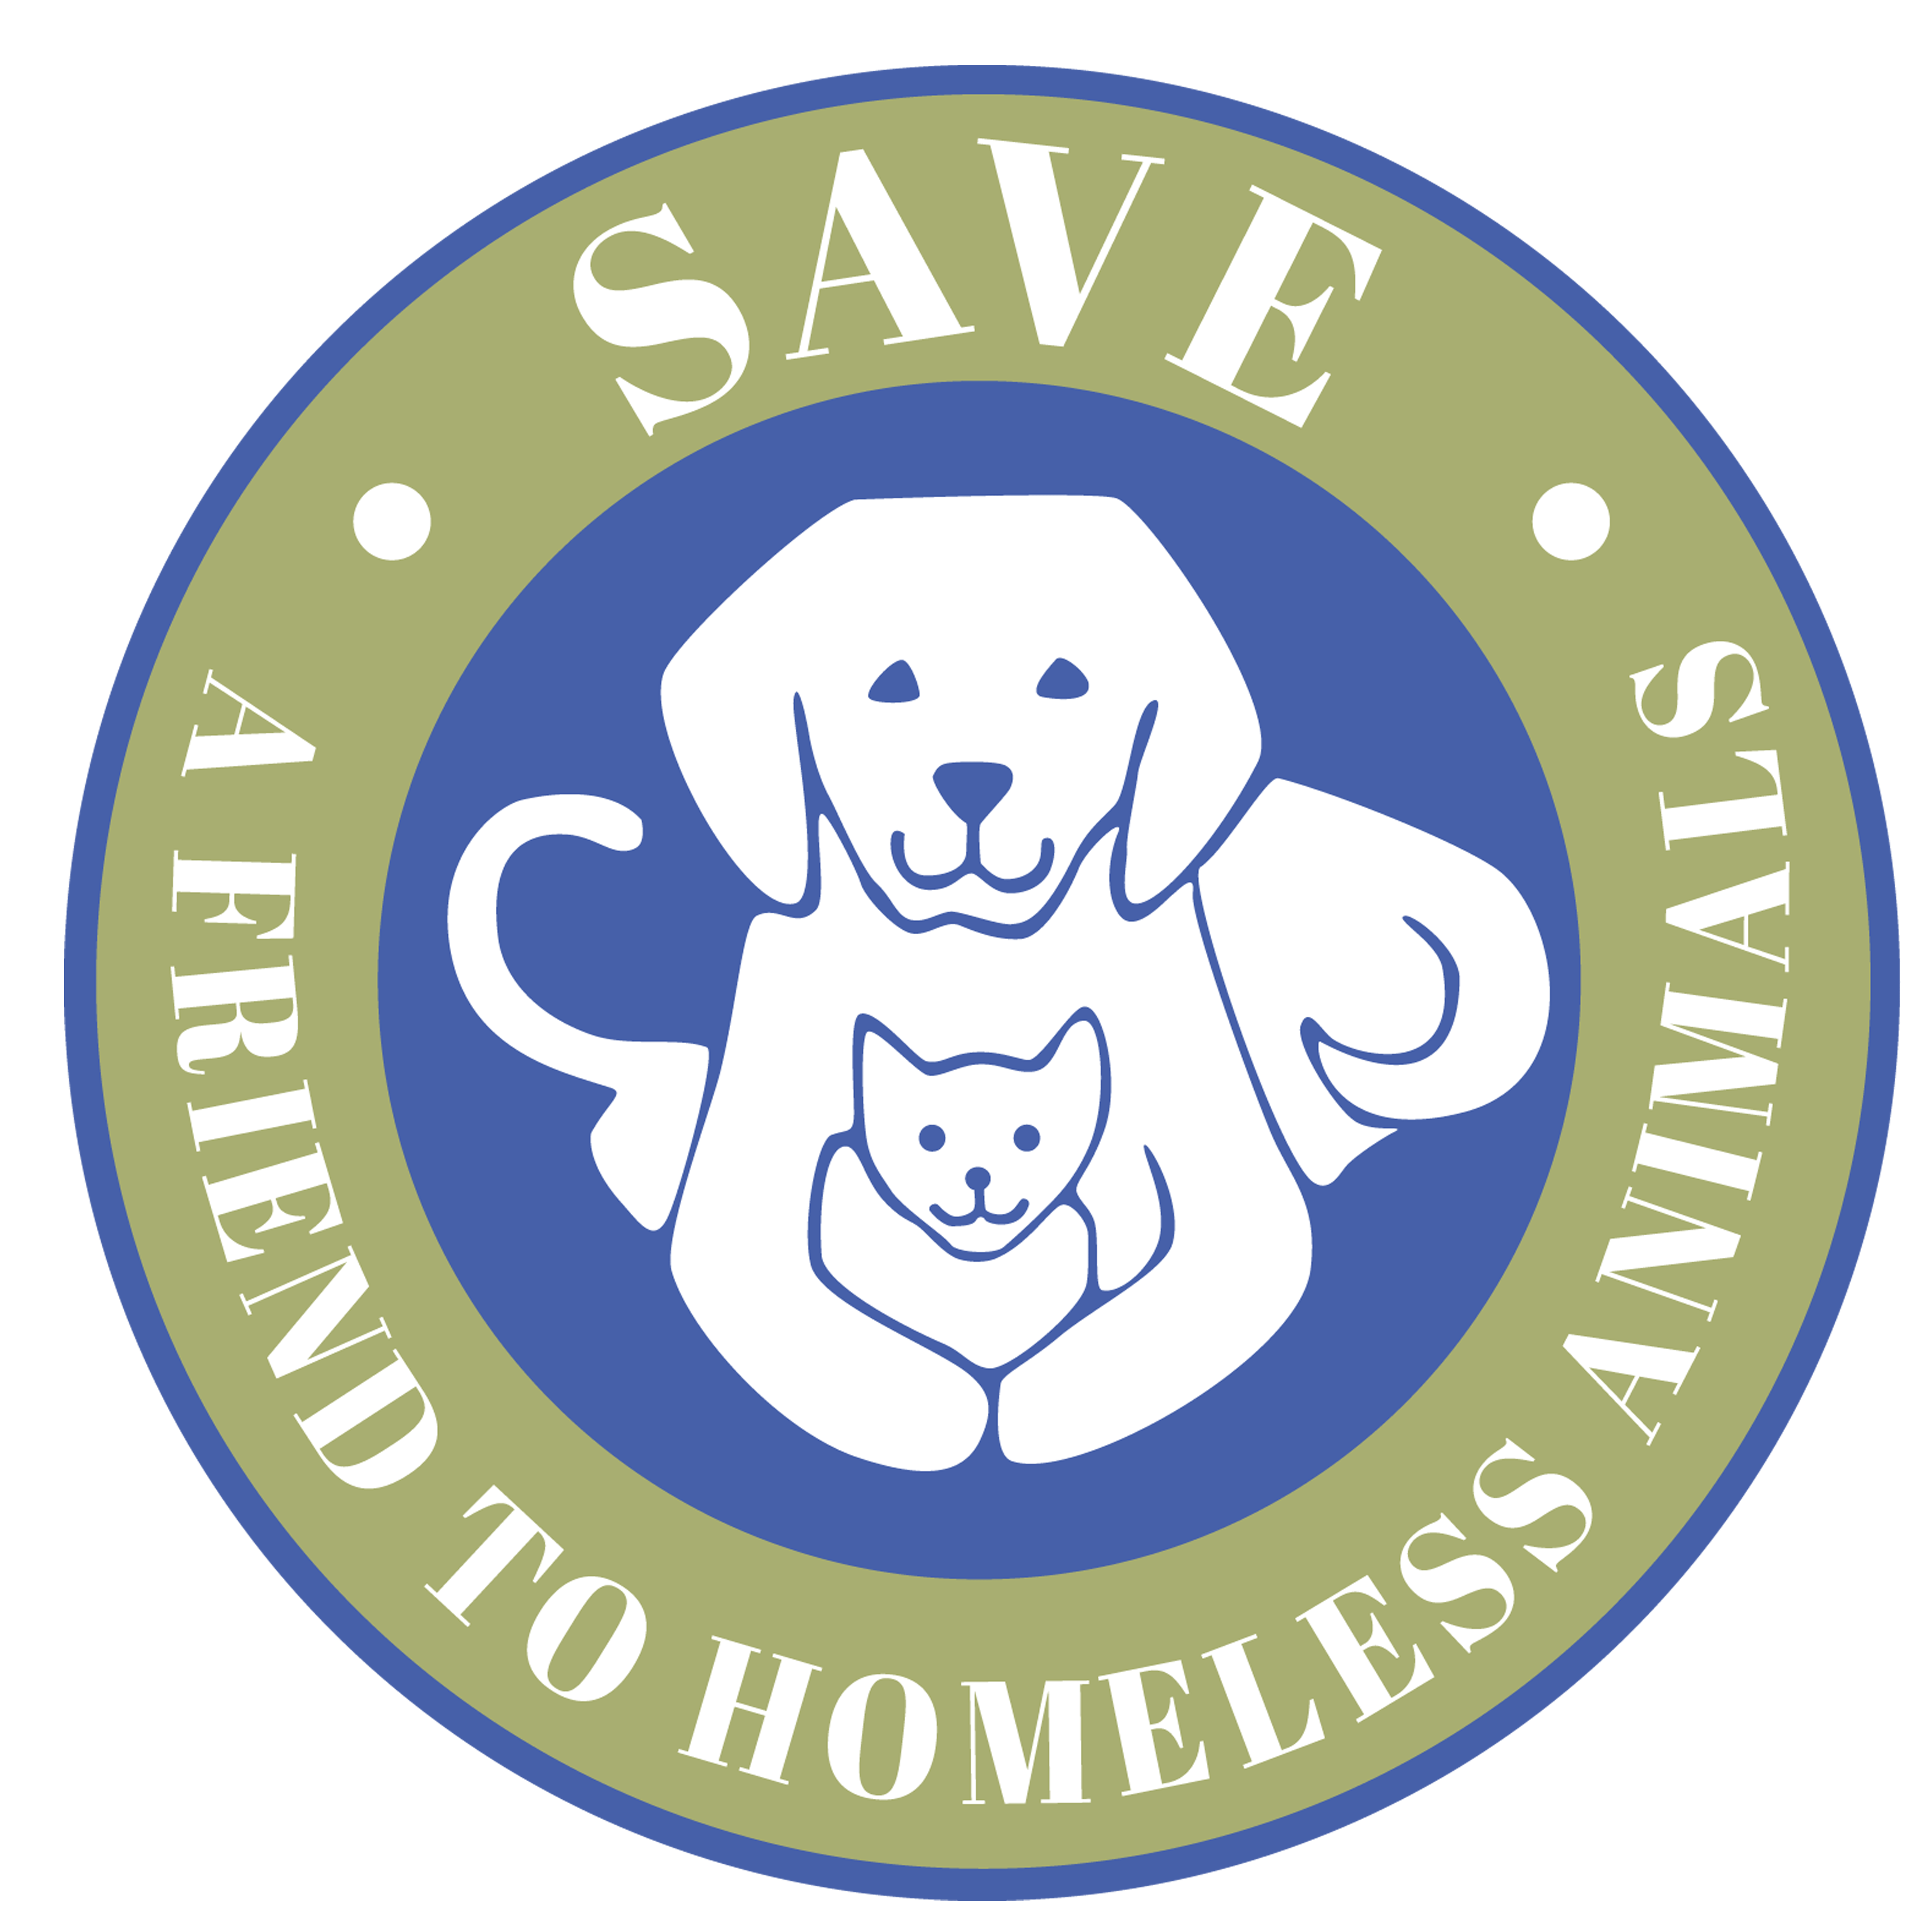 SAVE A Friend to Homeless Animals